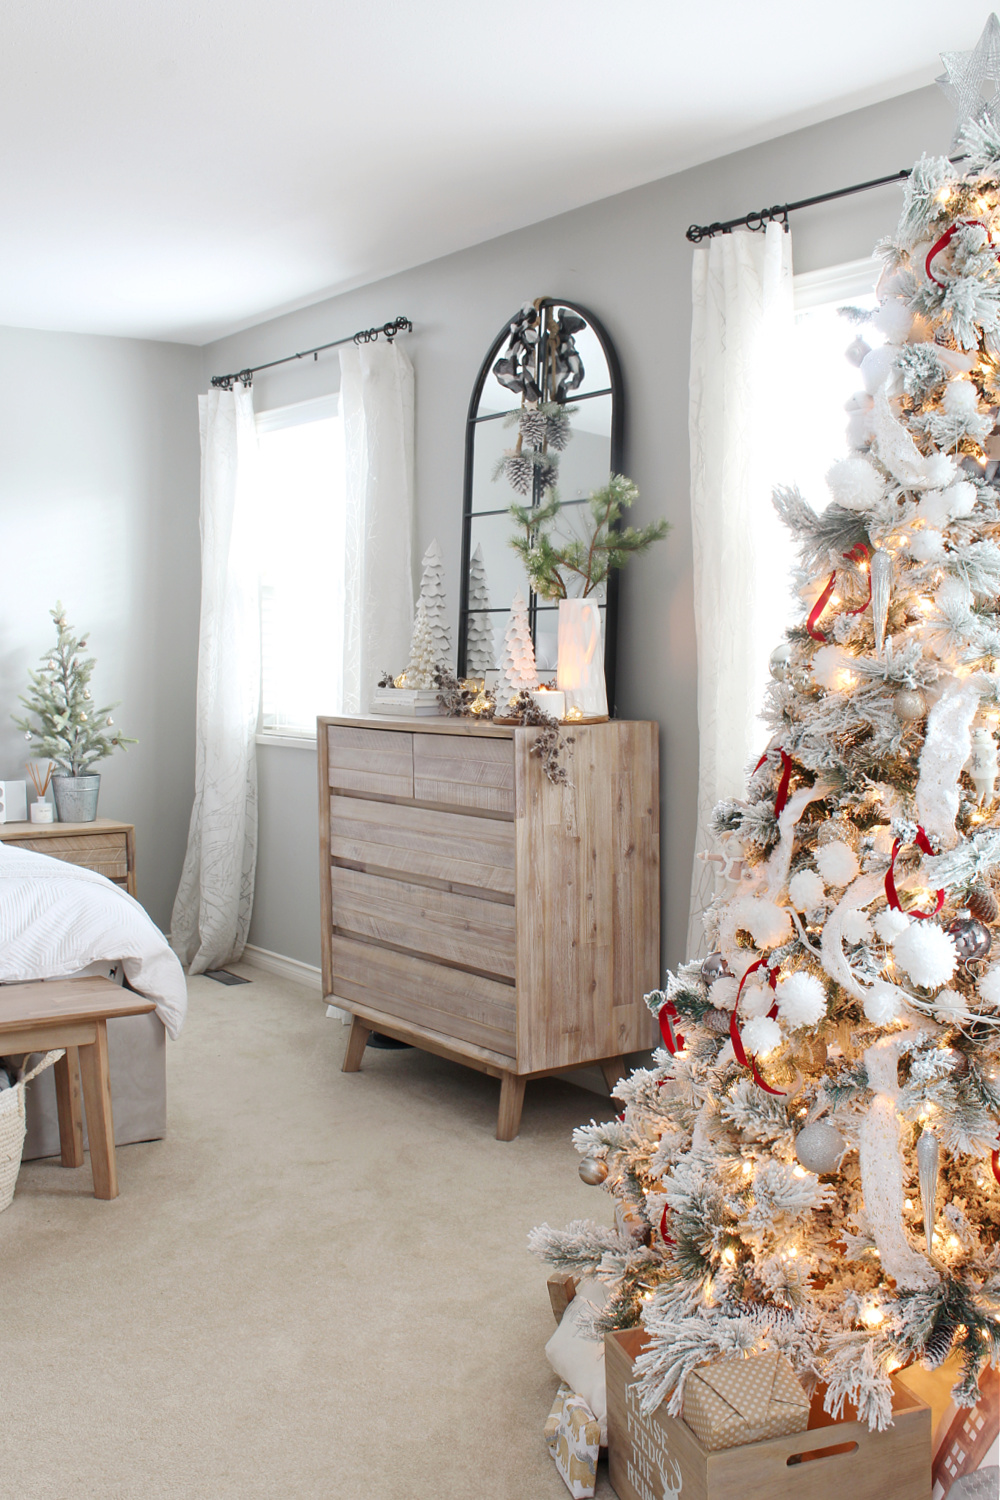 Bedroom decorated for Christmas with Christmas tree.